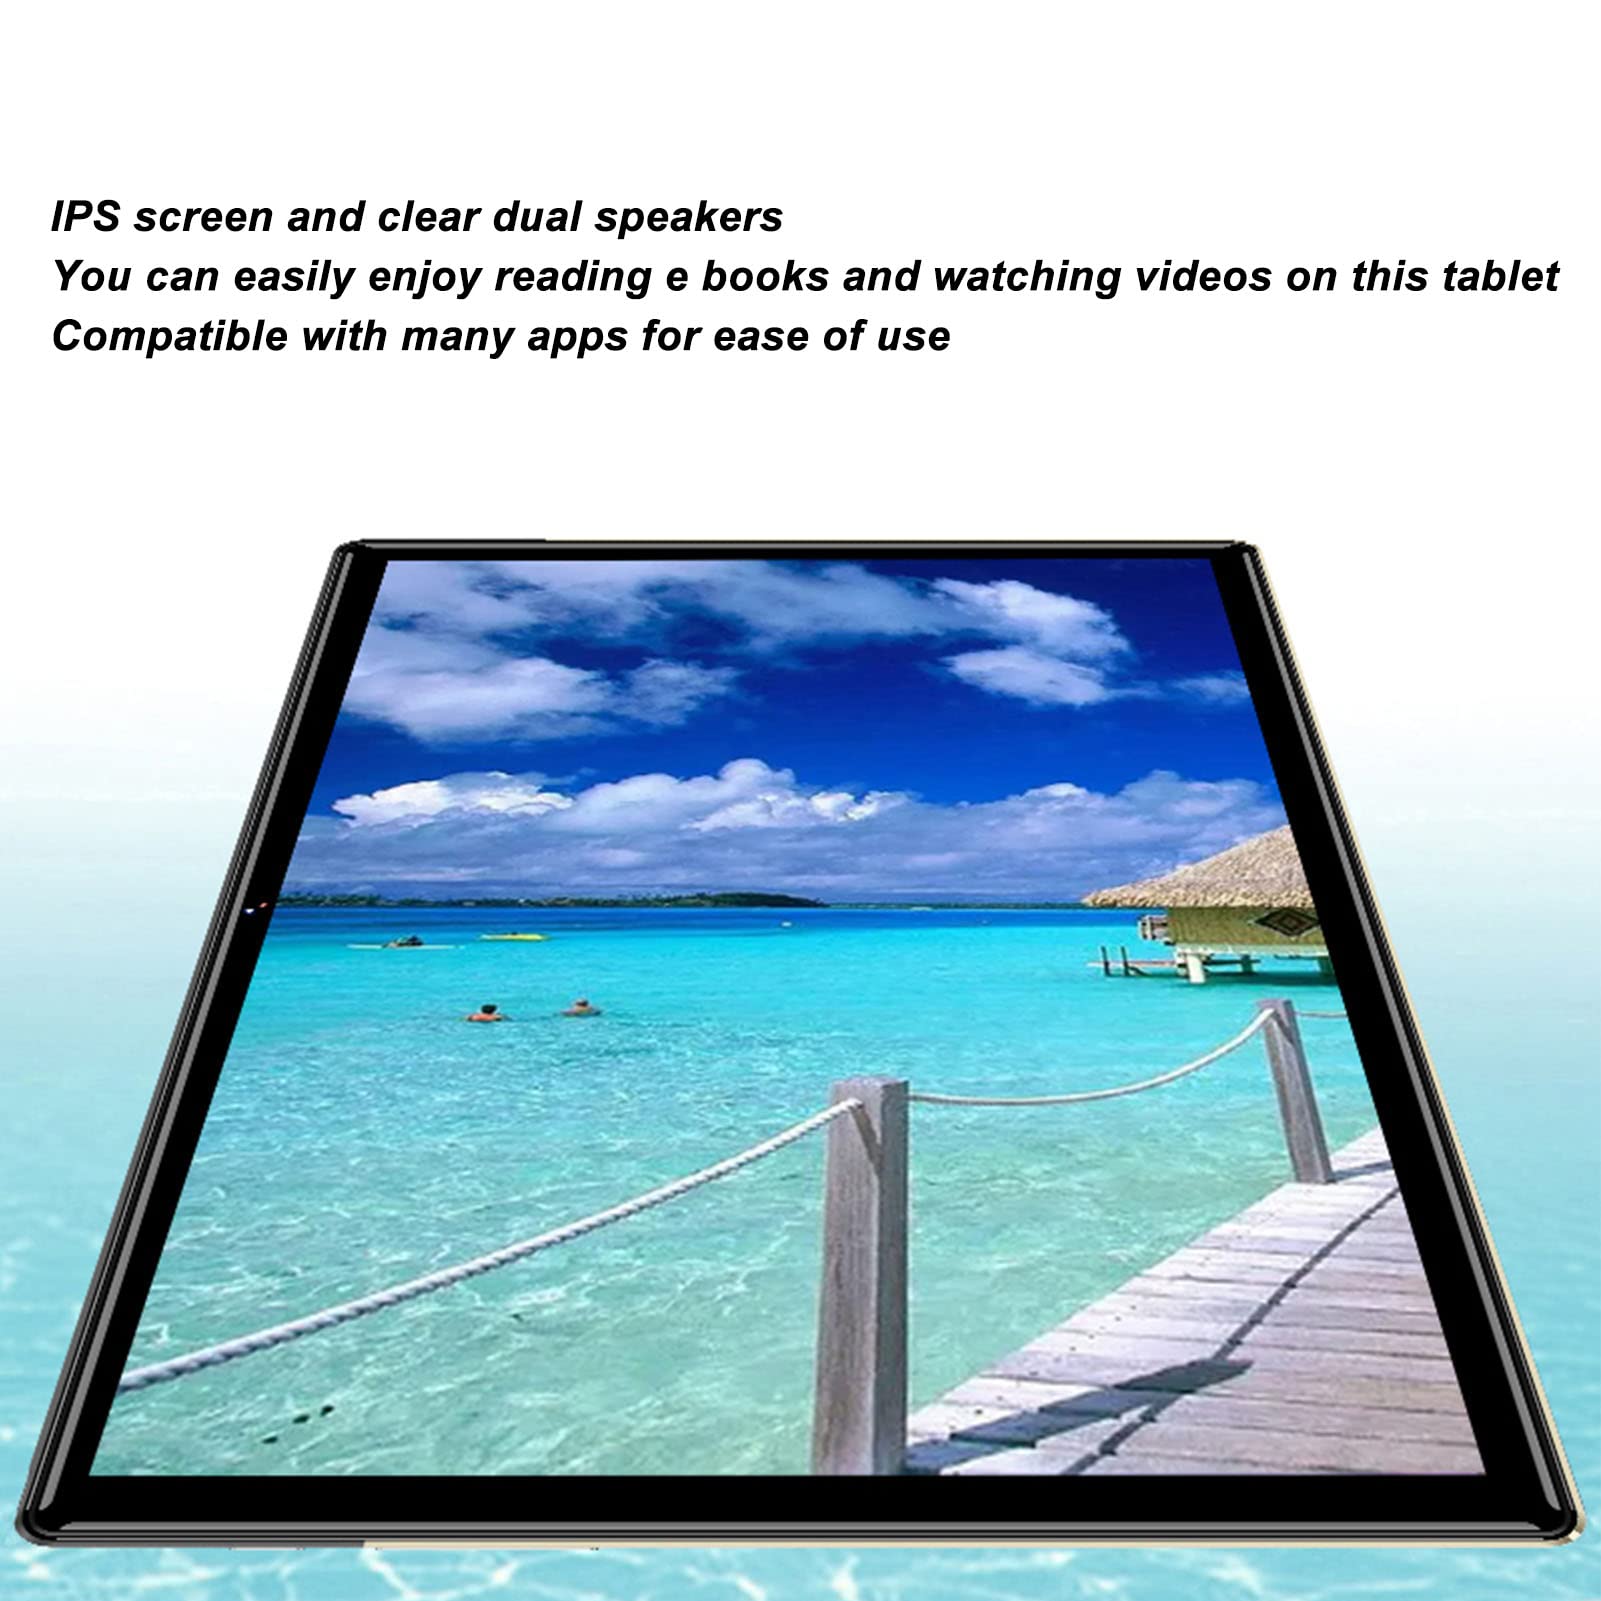 GOWENIC Android 12 Tablet, 10 Inch IPS HD Octa Core Tablet 8GB RAM 256GB ROM 7000mAh Battery 8MP Front 16MP Rear Camera 5G WiFi Calling Tablet, Blue